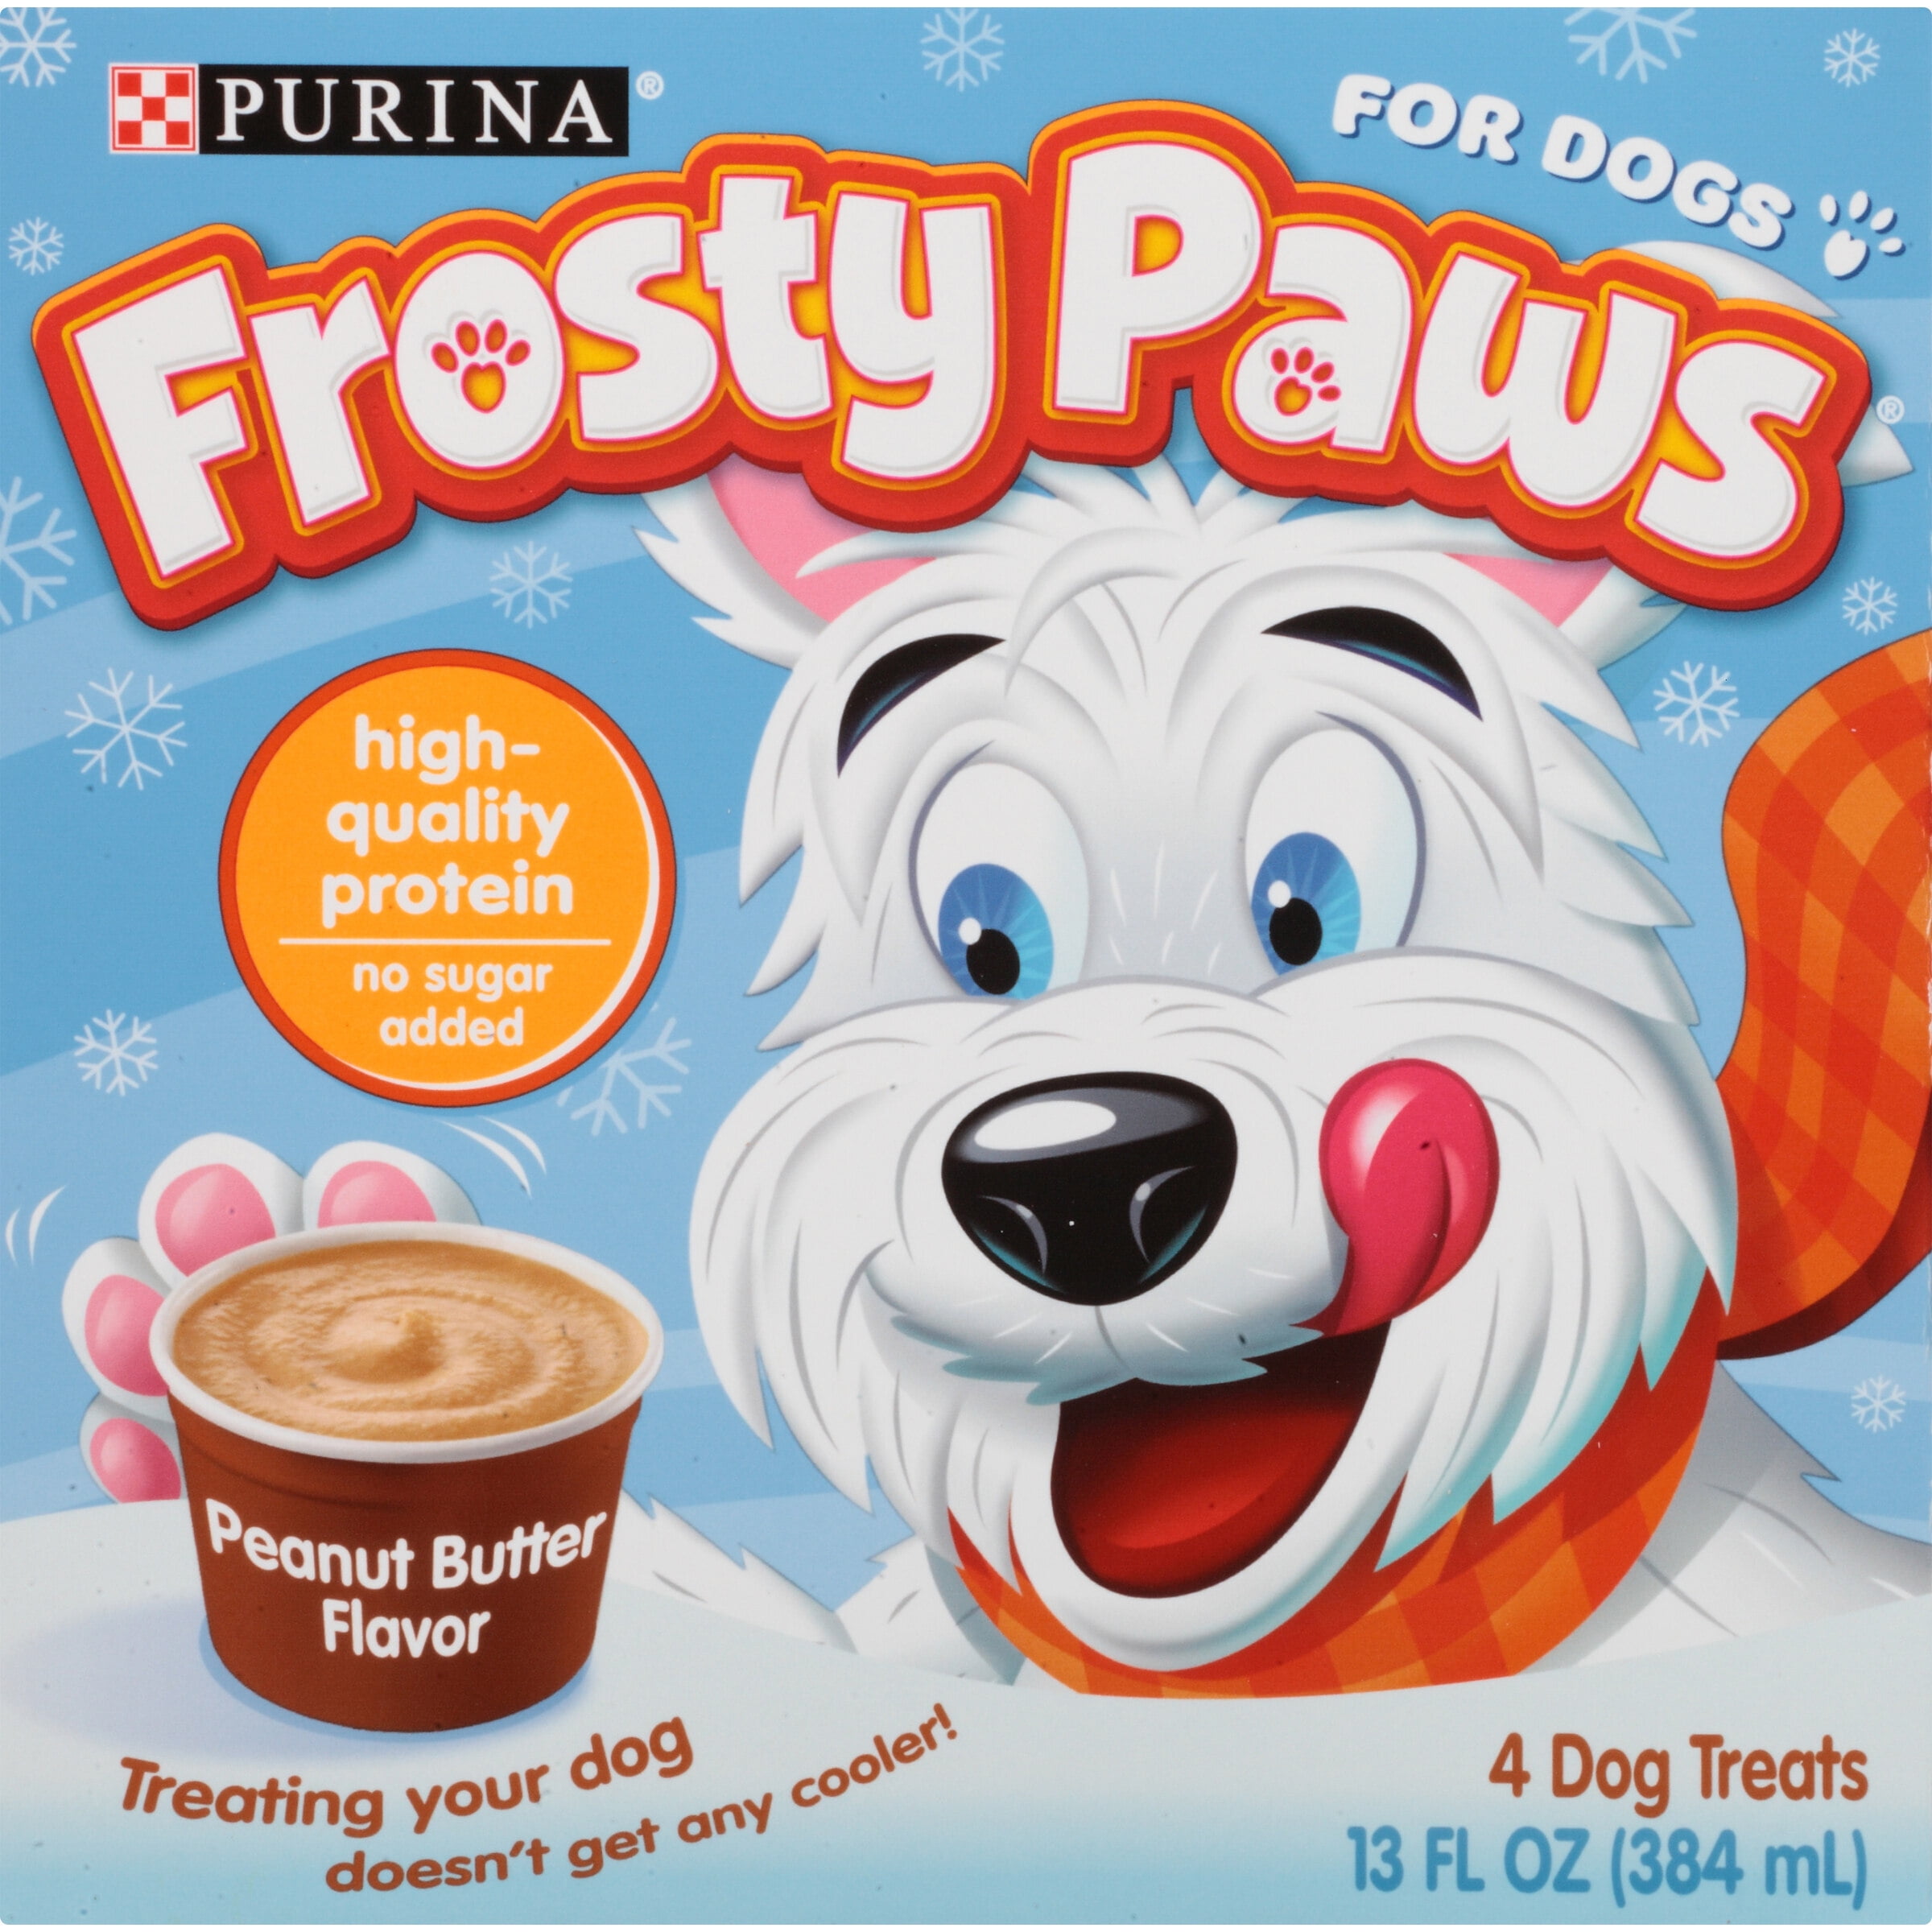 frosty paws for cats